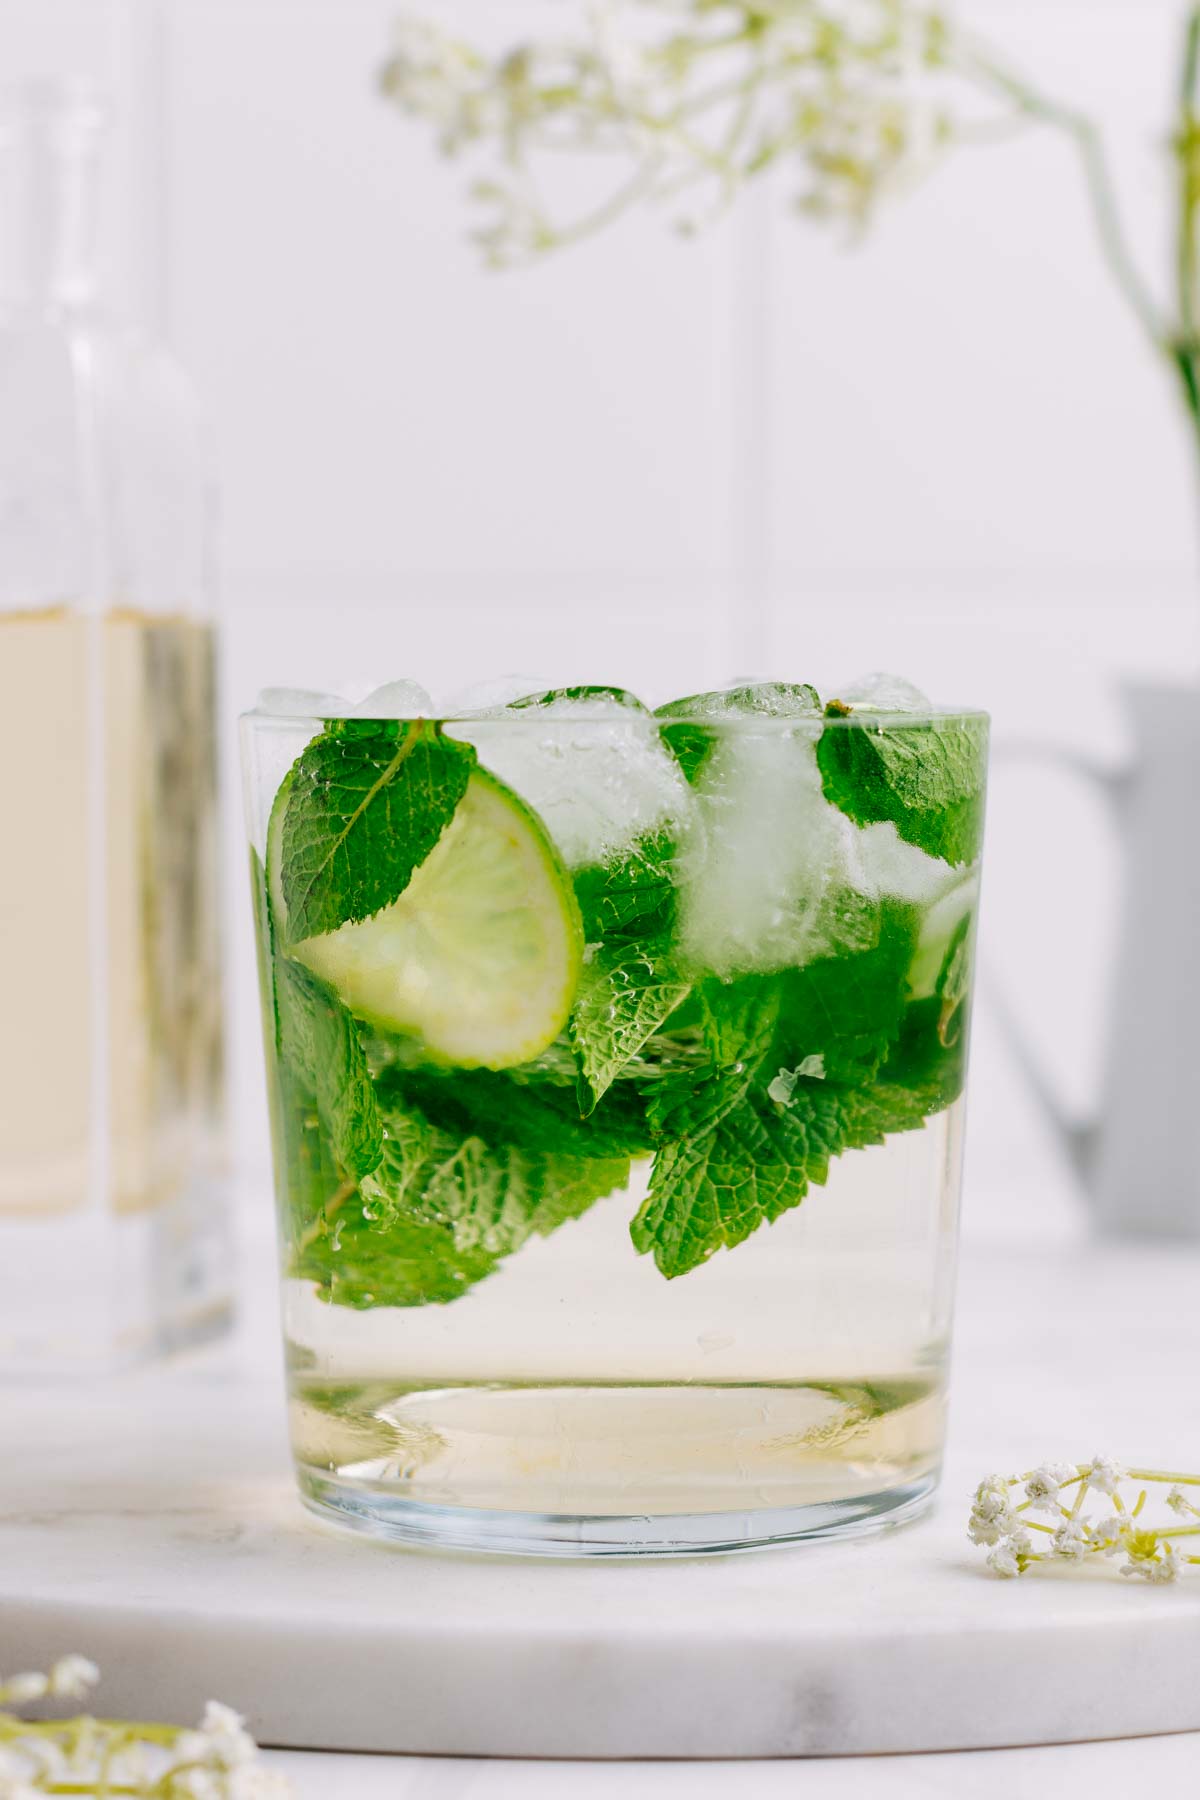 A glass with Hugo Spritz and with a lime wedge, mint leaves and ice cubes in the glass and elderflower decorations around it.